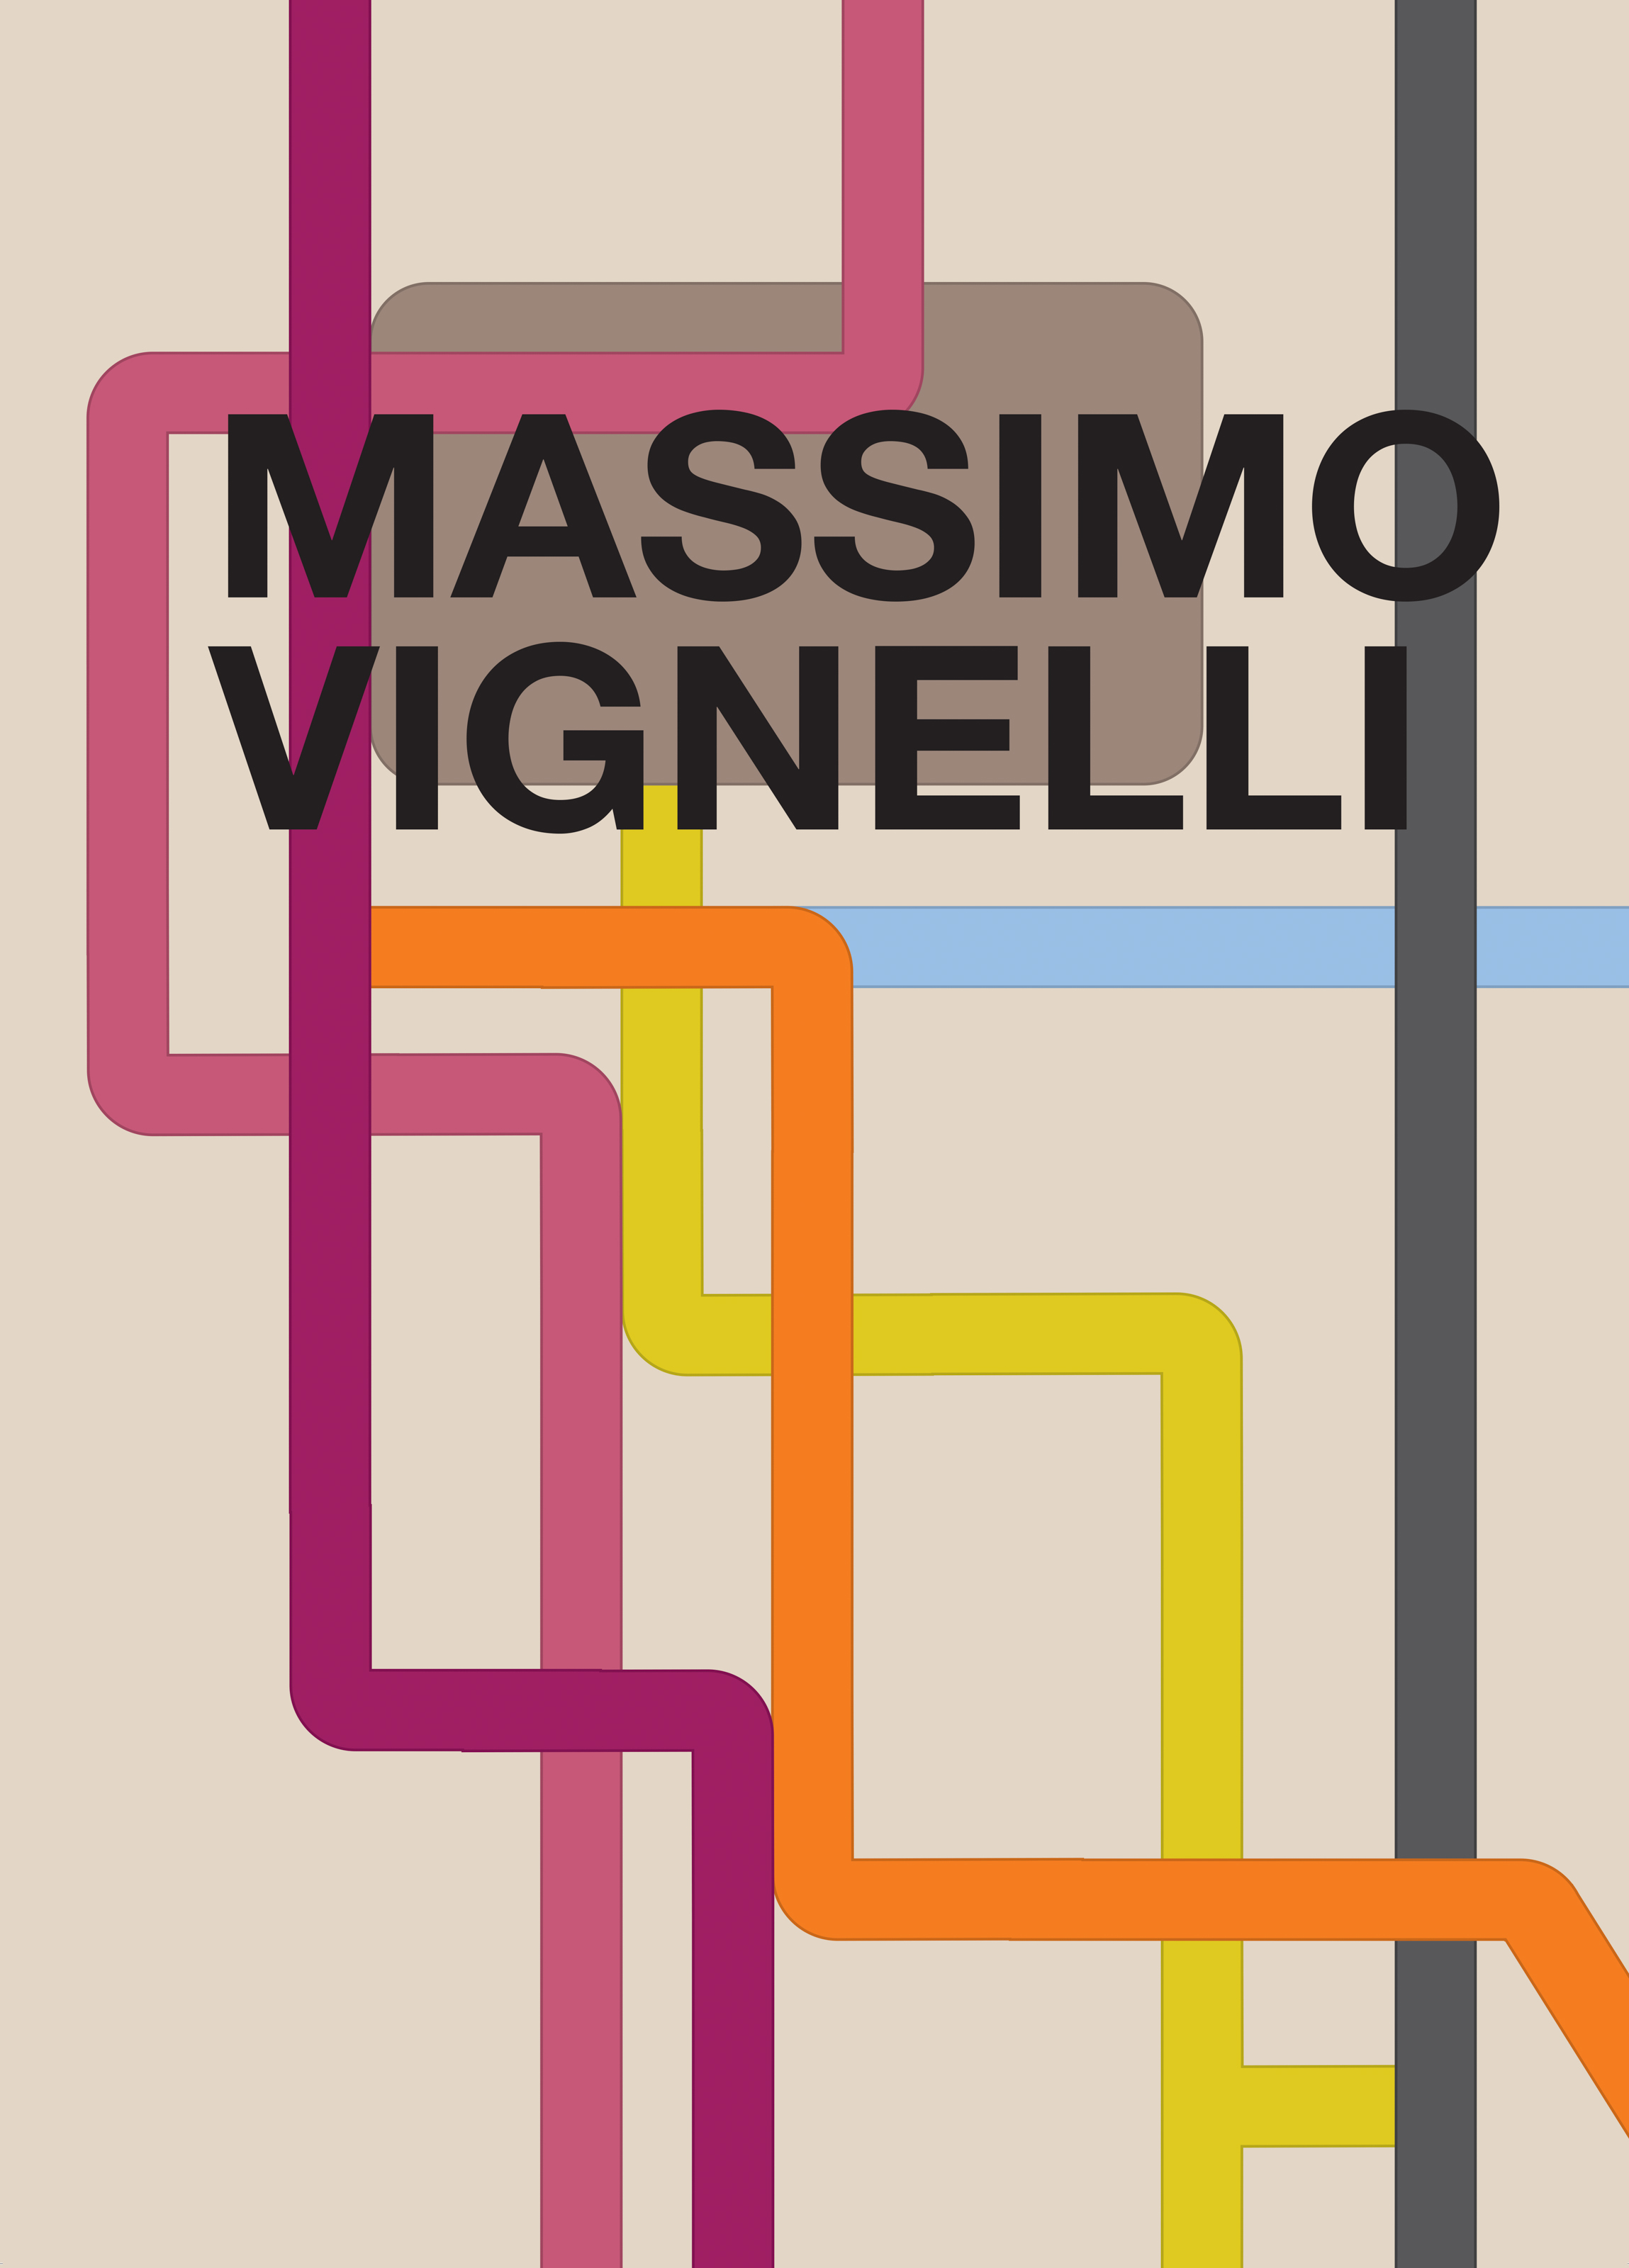 Poster designed by Kailyn Groski inspired by Massimo Vignelli's diagrams for the New York City subway system.